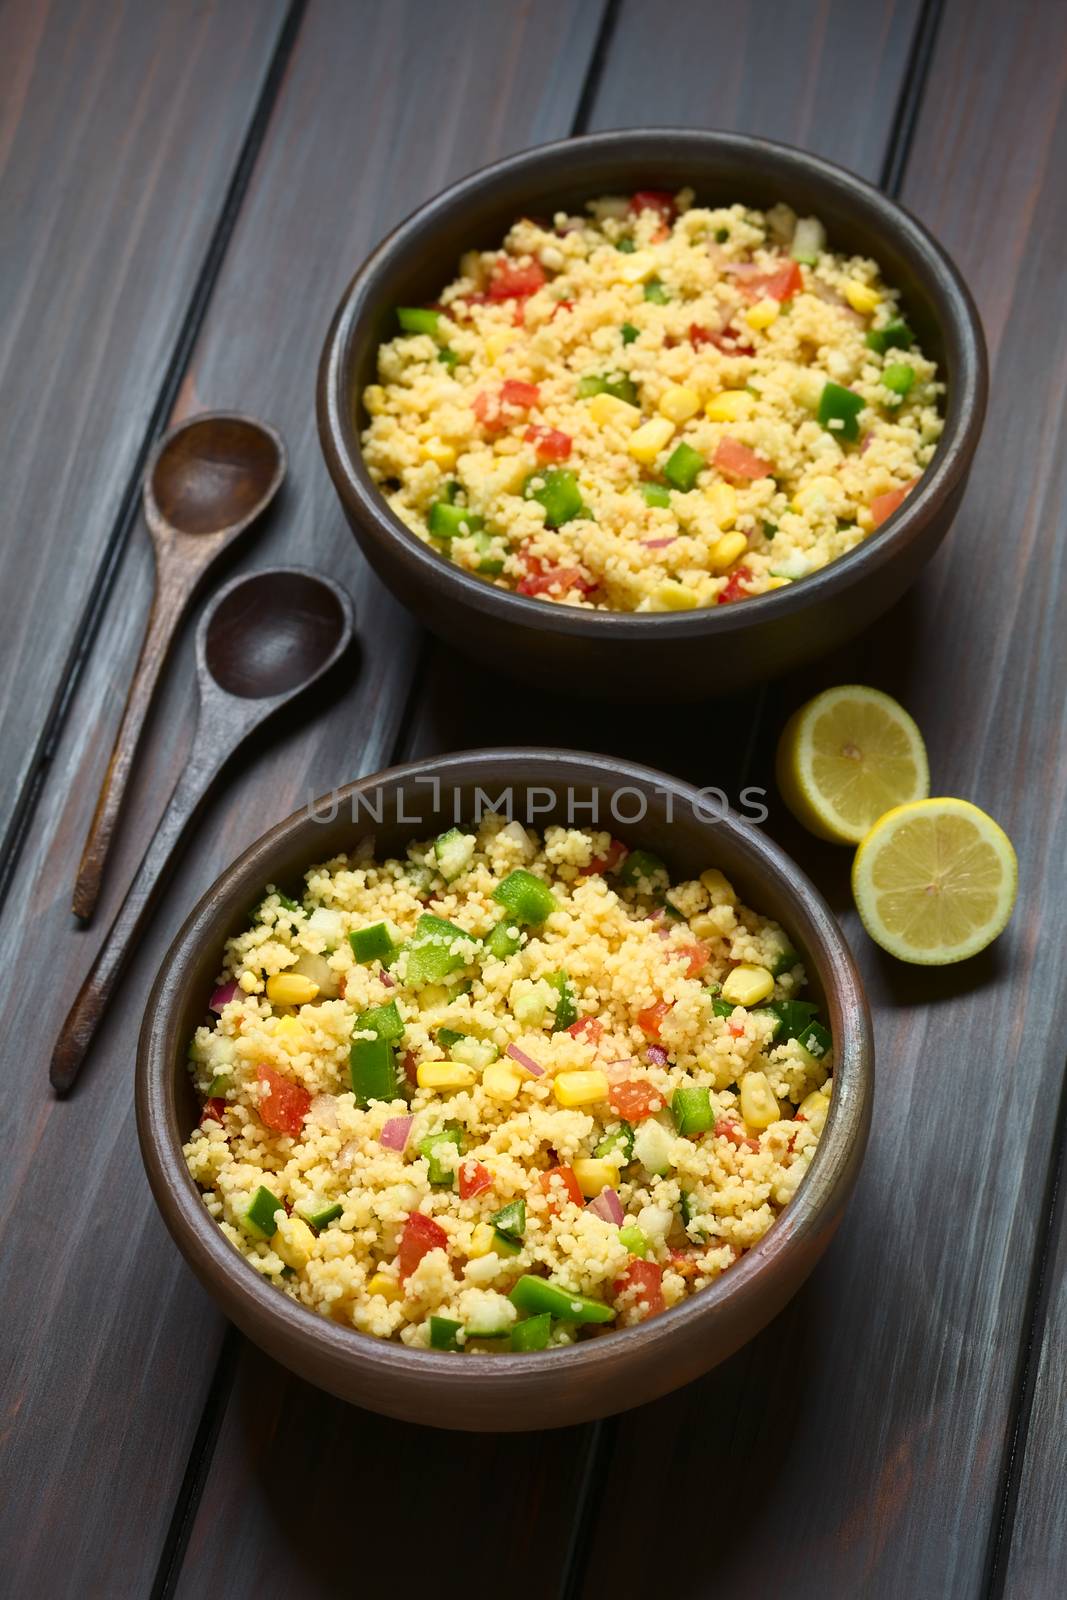 Vegetarian couscous salad made with bell pepper, tomato, cucumber, red onion and sweet corn kernels, served in rustic bowls, wooden spoons and lemon on the side. Photographed on dark wood with natural light. (Selective Focus, Focus in the middle of the first salad)